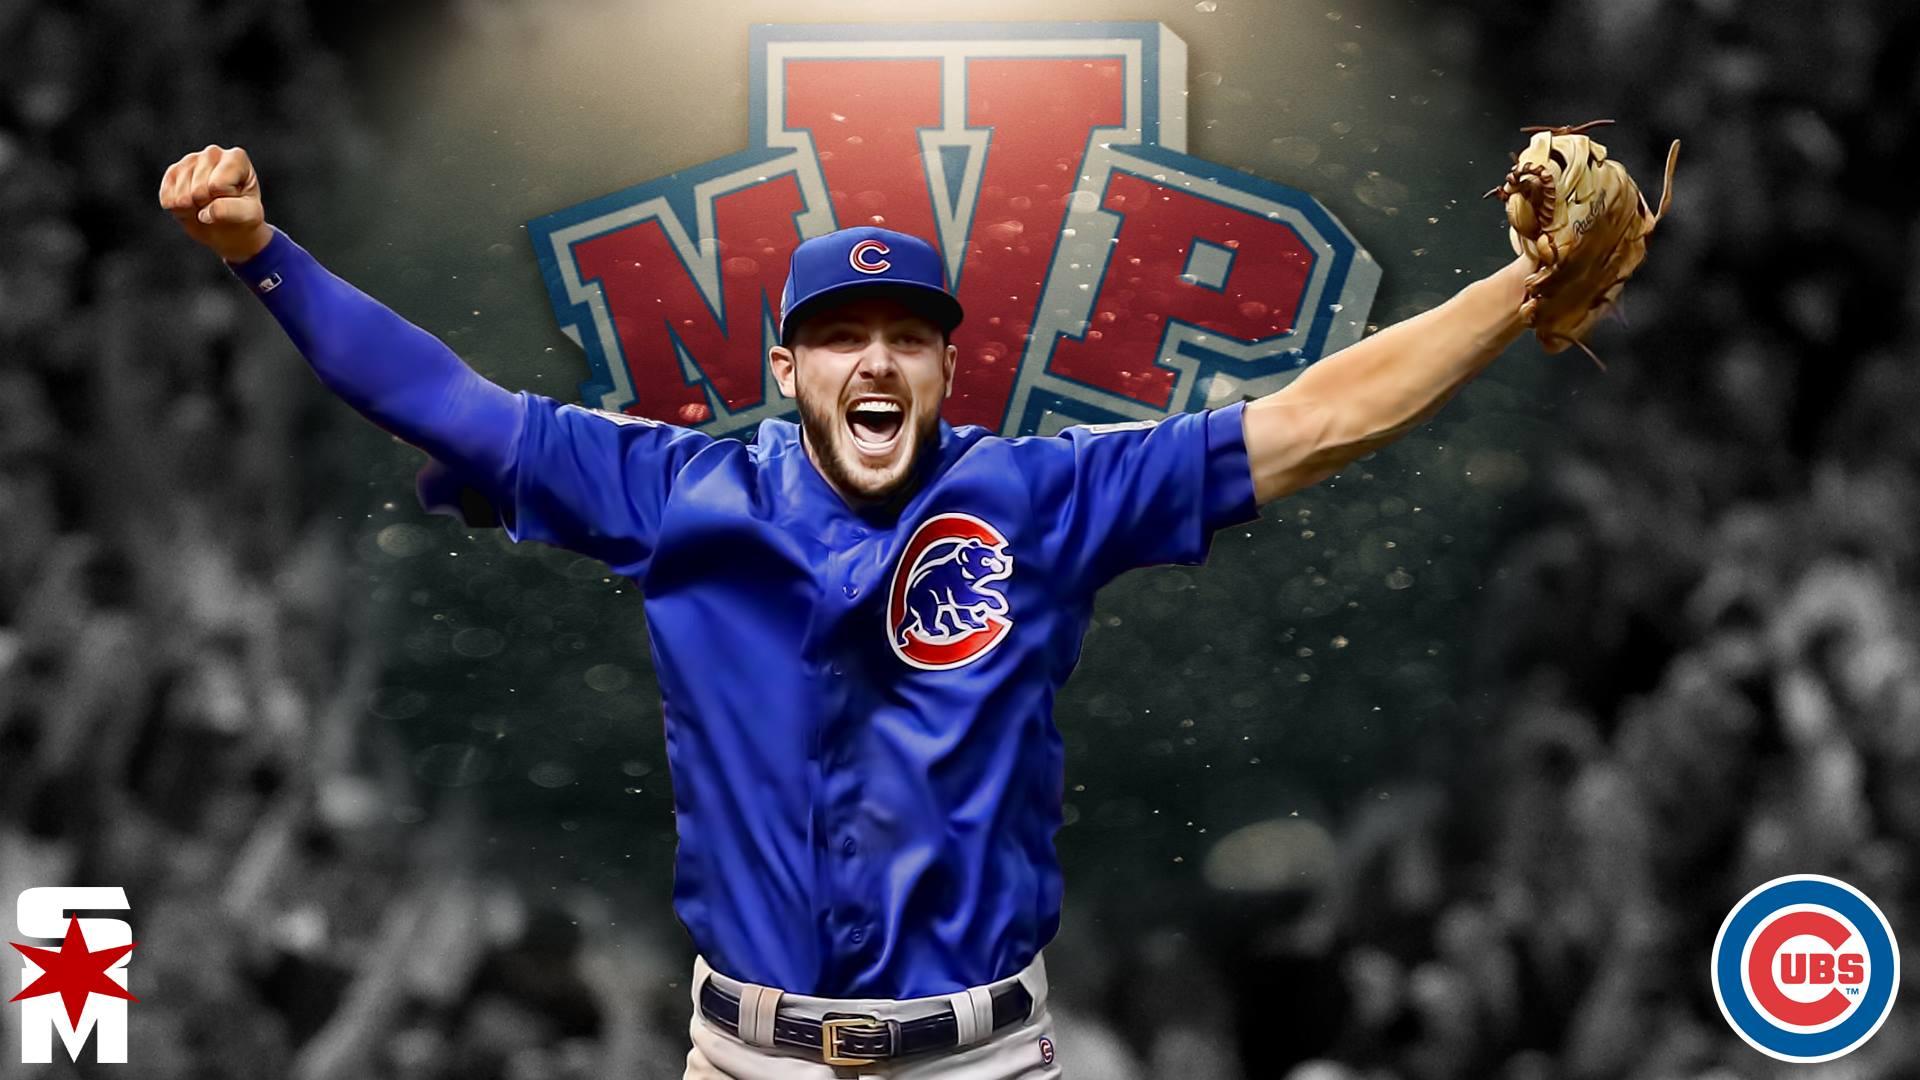 Cubs Sign Kris Bryant To Record Breaking Deal